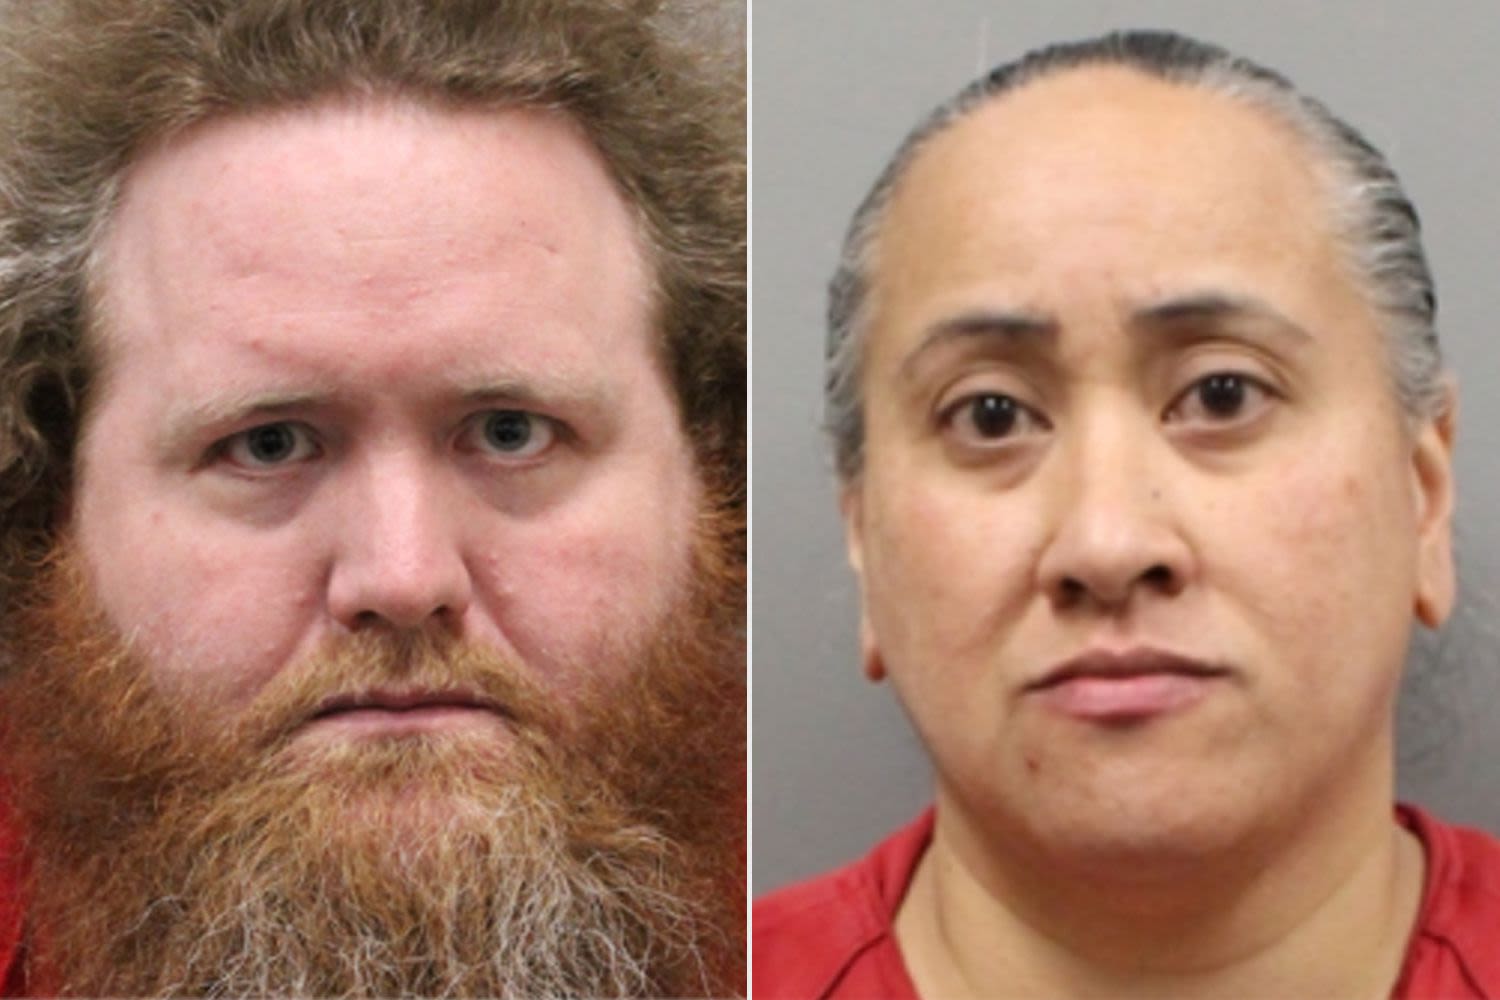 Nevada Parents Arrested After 11-Year-Old Son with Autism Found Locked in Filthy Metal Cage